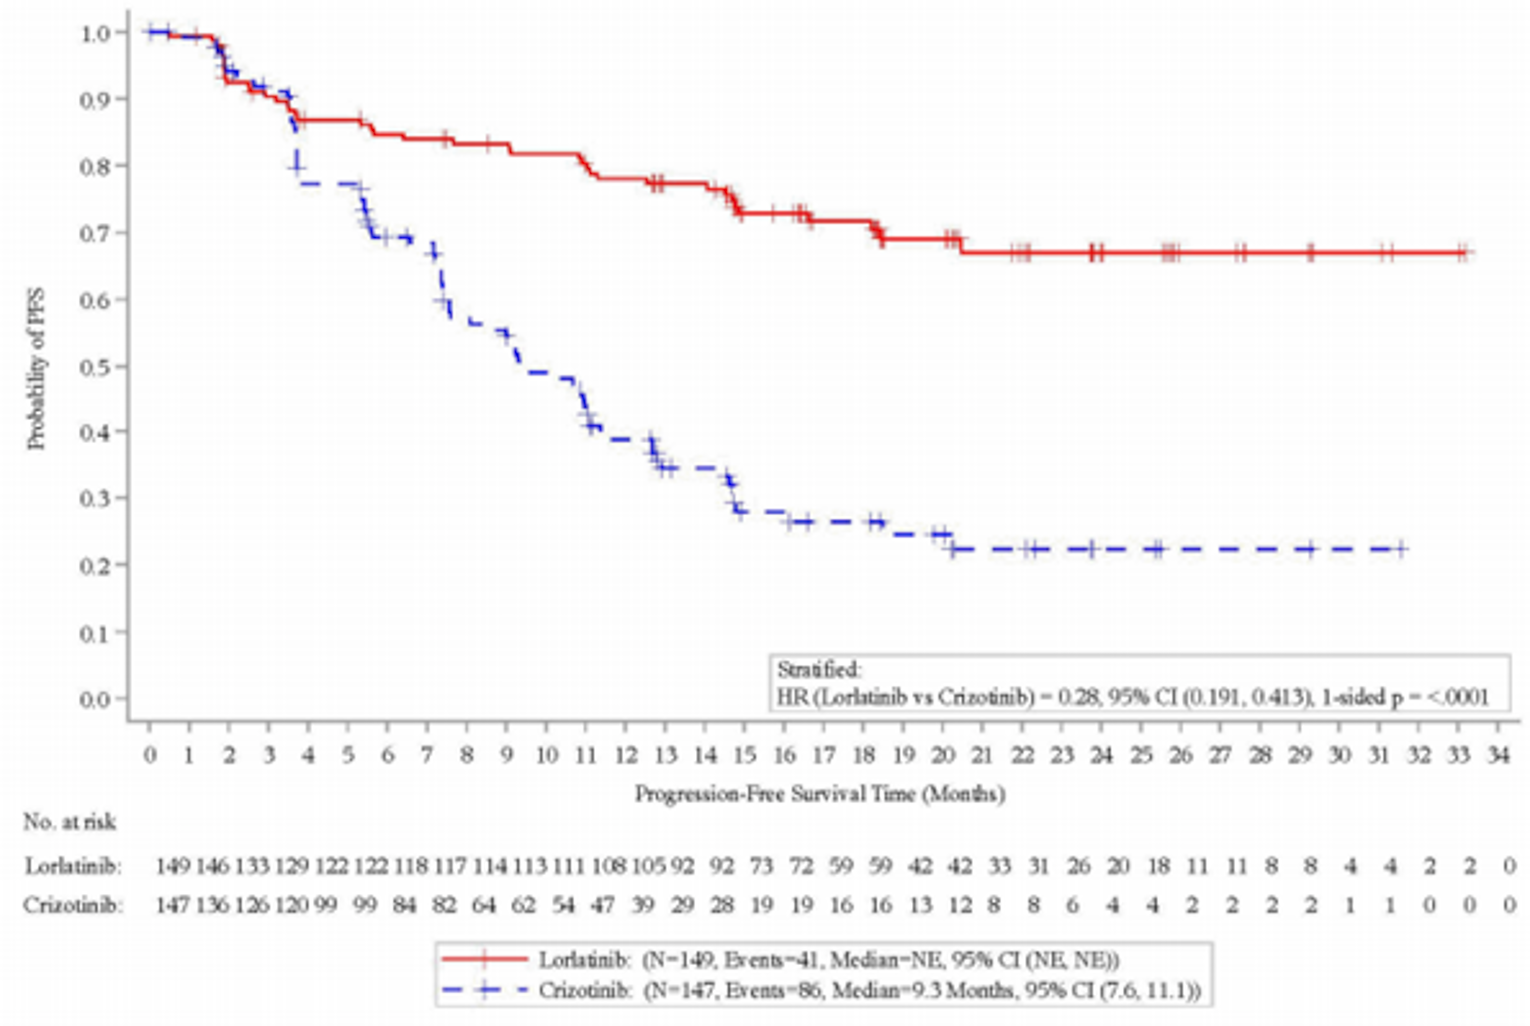 Kaplan-Meier plot depicting the progression-free survival as determined by BICR assessment between the lorlatinib and crizotinib groups for the CROWN trial at the time of the primary analysis.